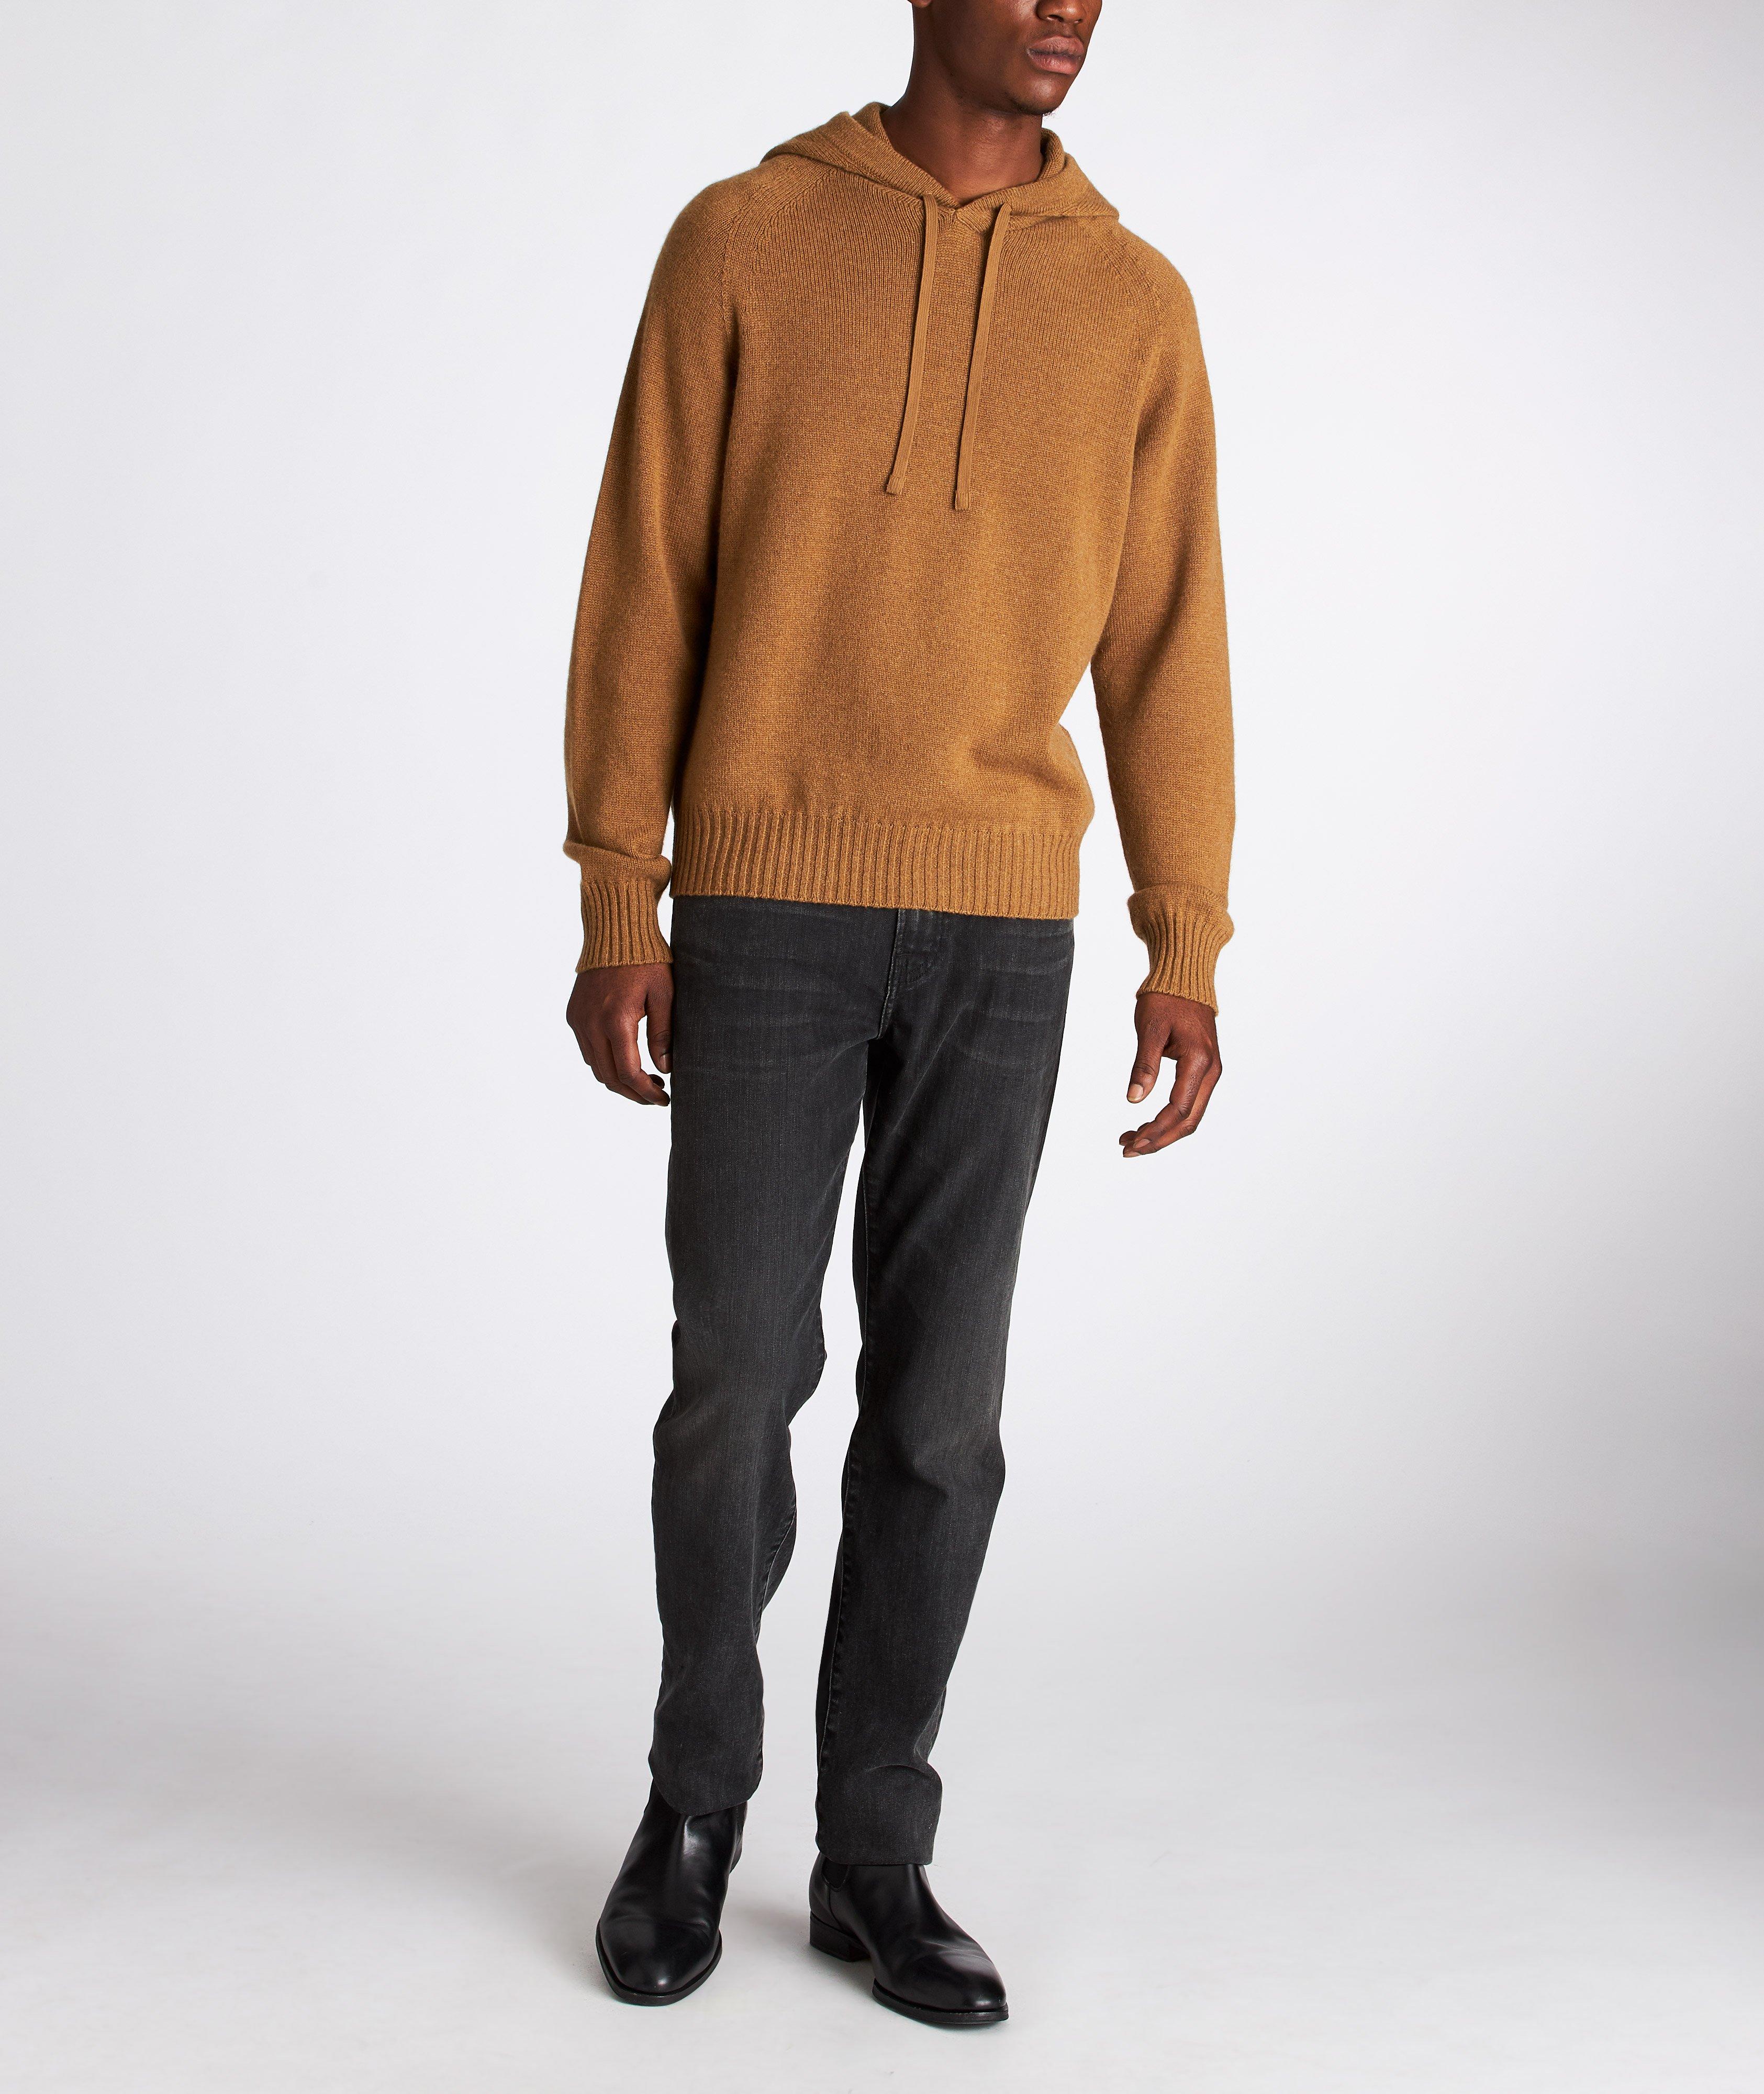 Knit Cashmere Hoodie image 4